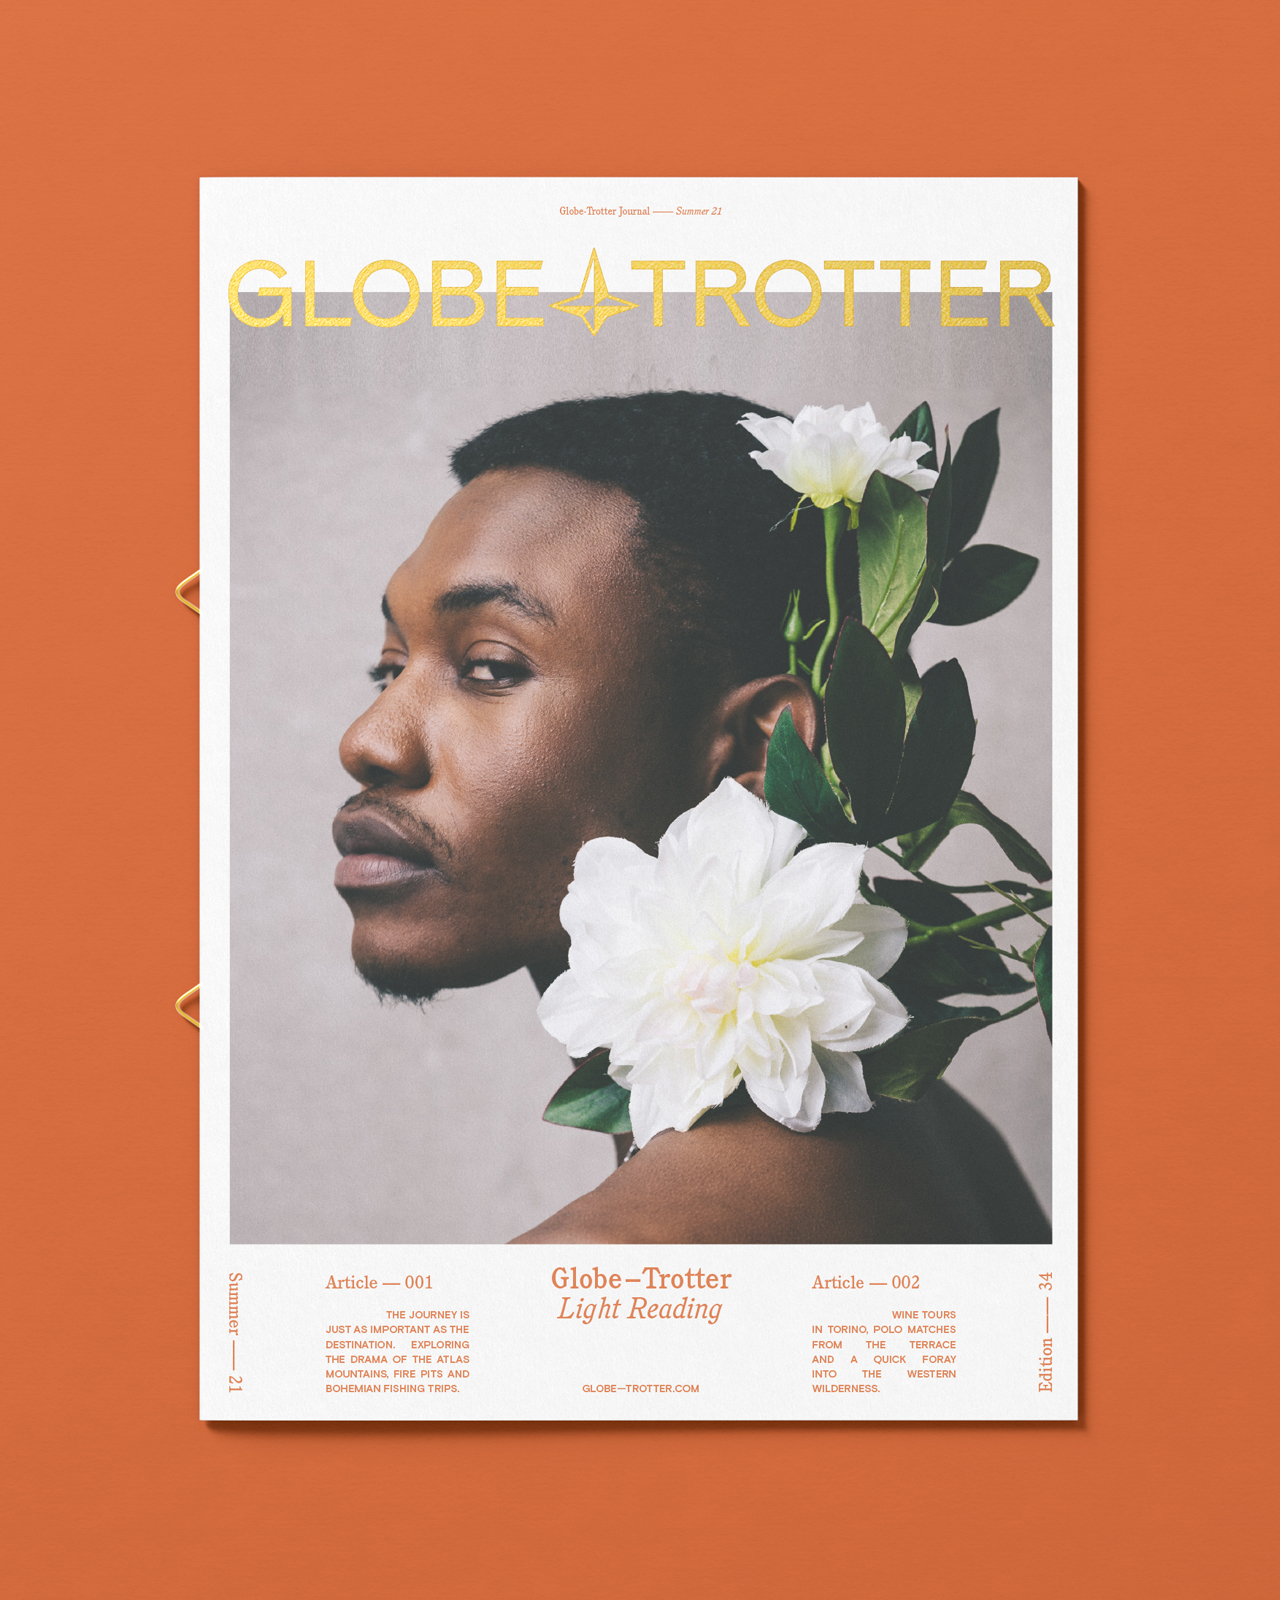 This is not a luxury re-bland. Globe-Trotter is packed with character.